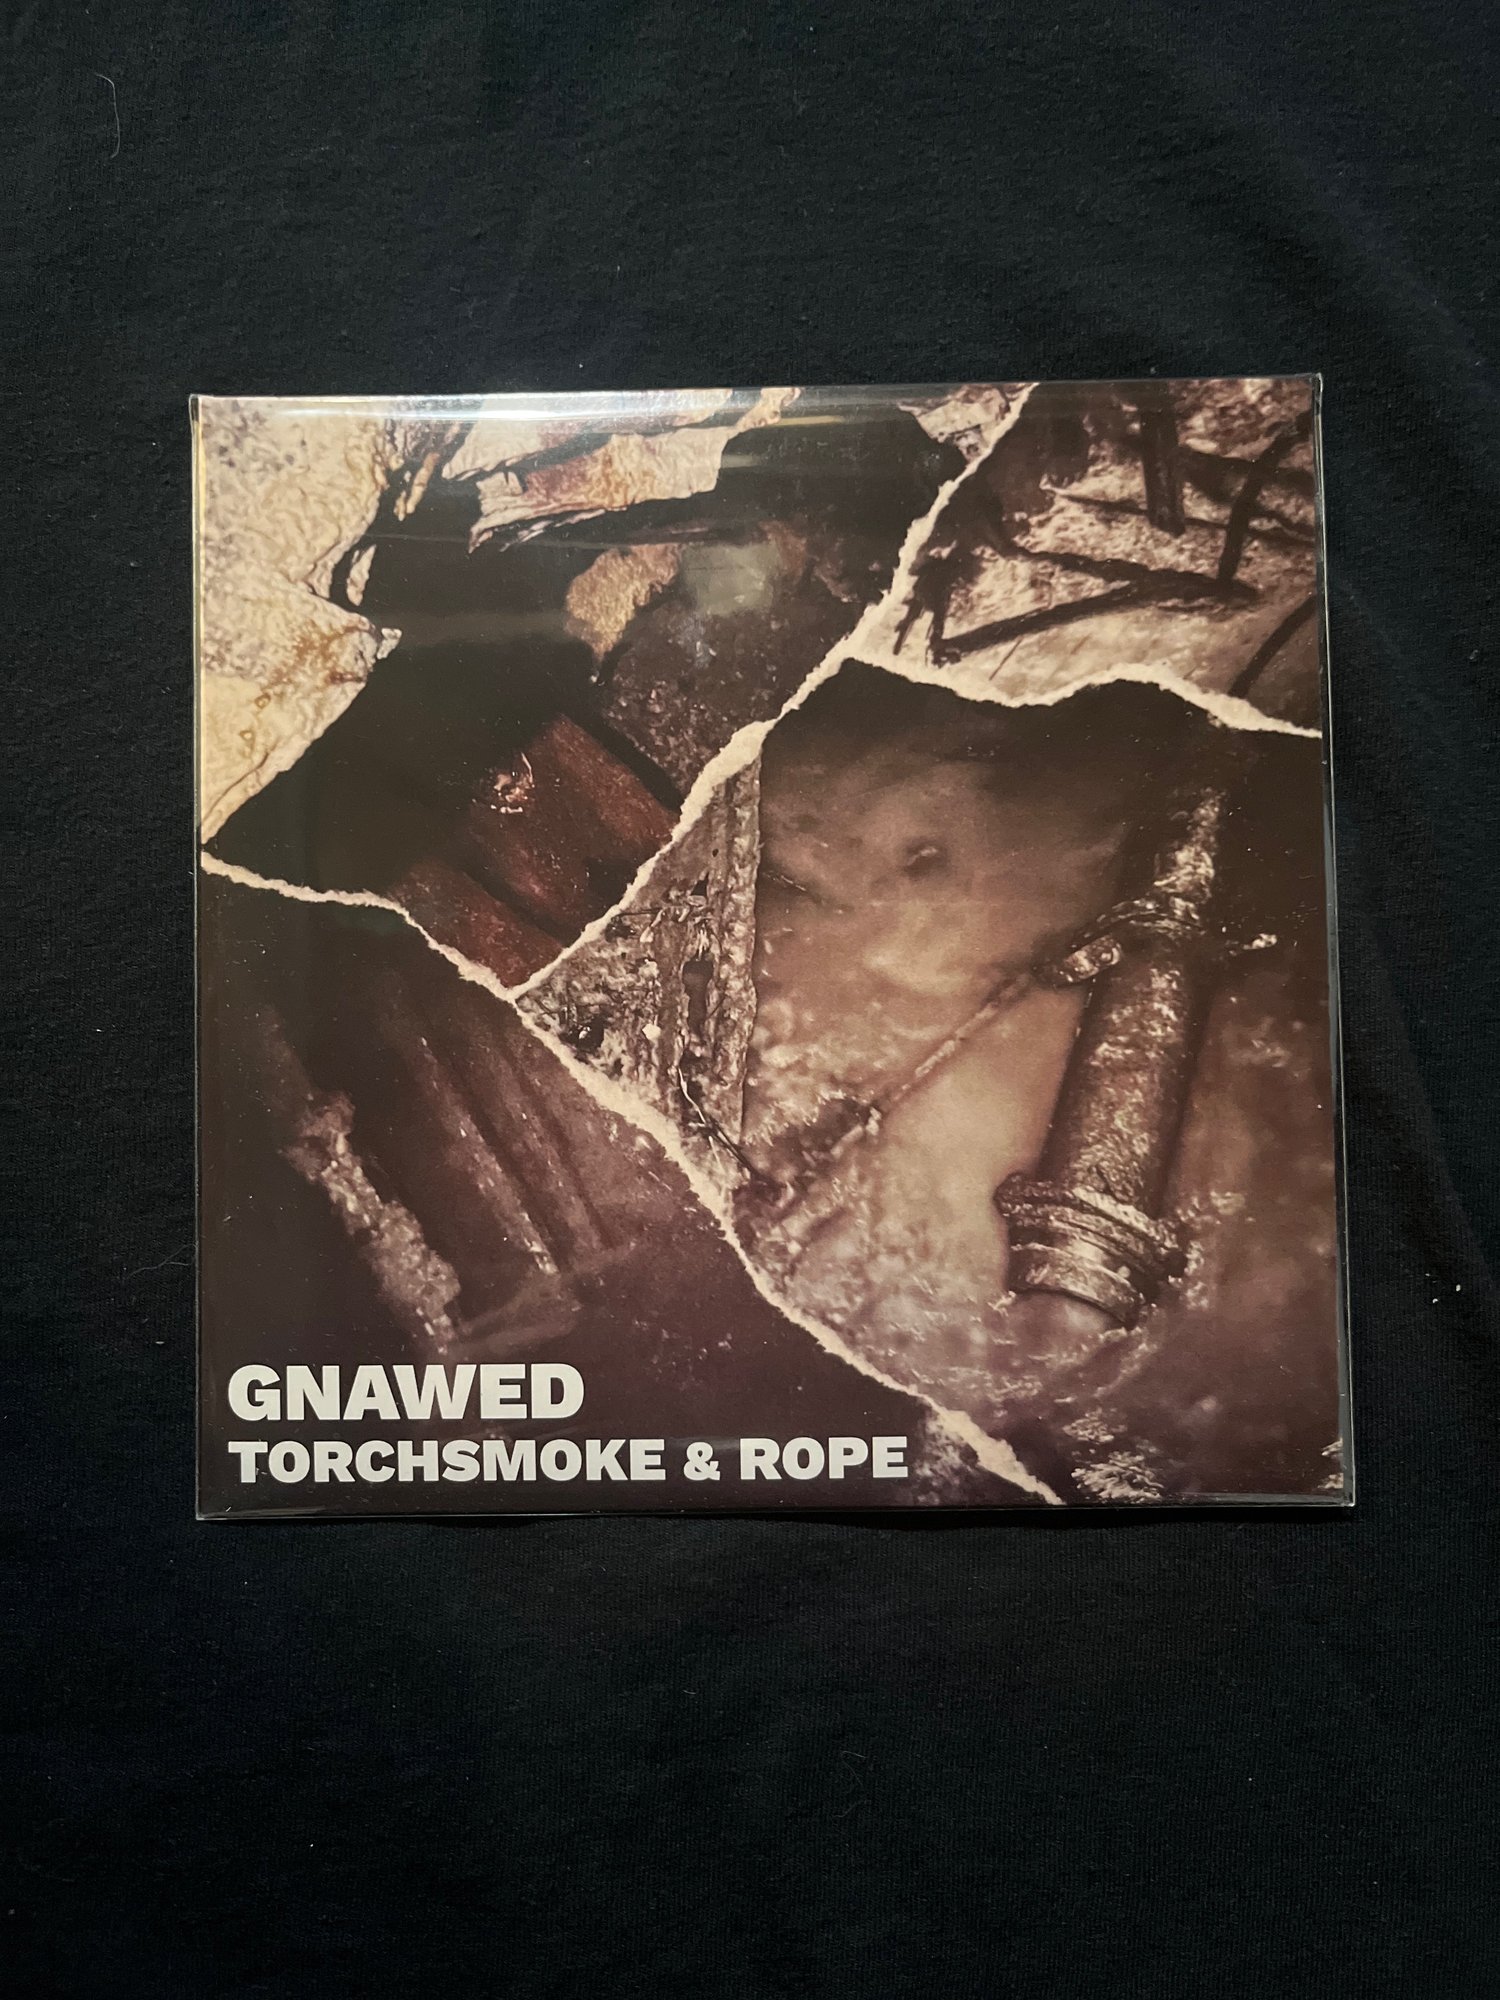 Gnawed - Torchsmoke & Rope 7" (Difficult Interactions)